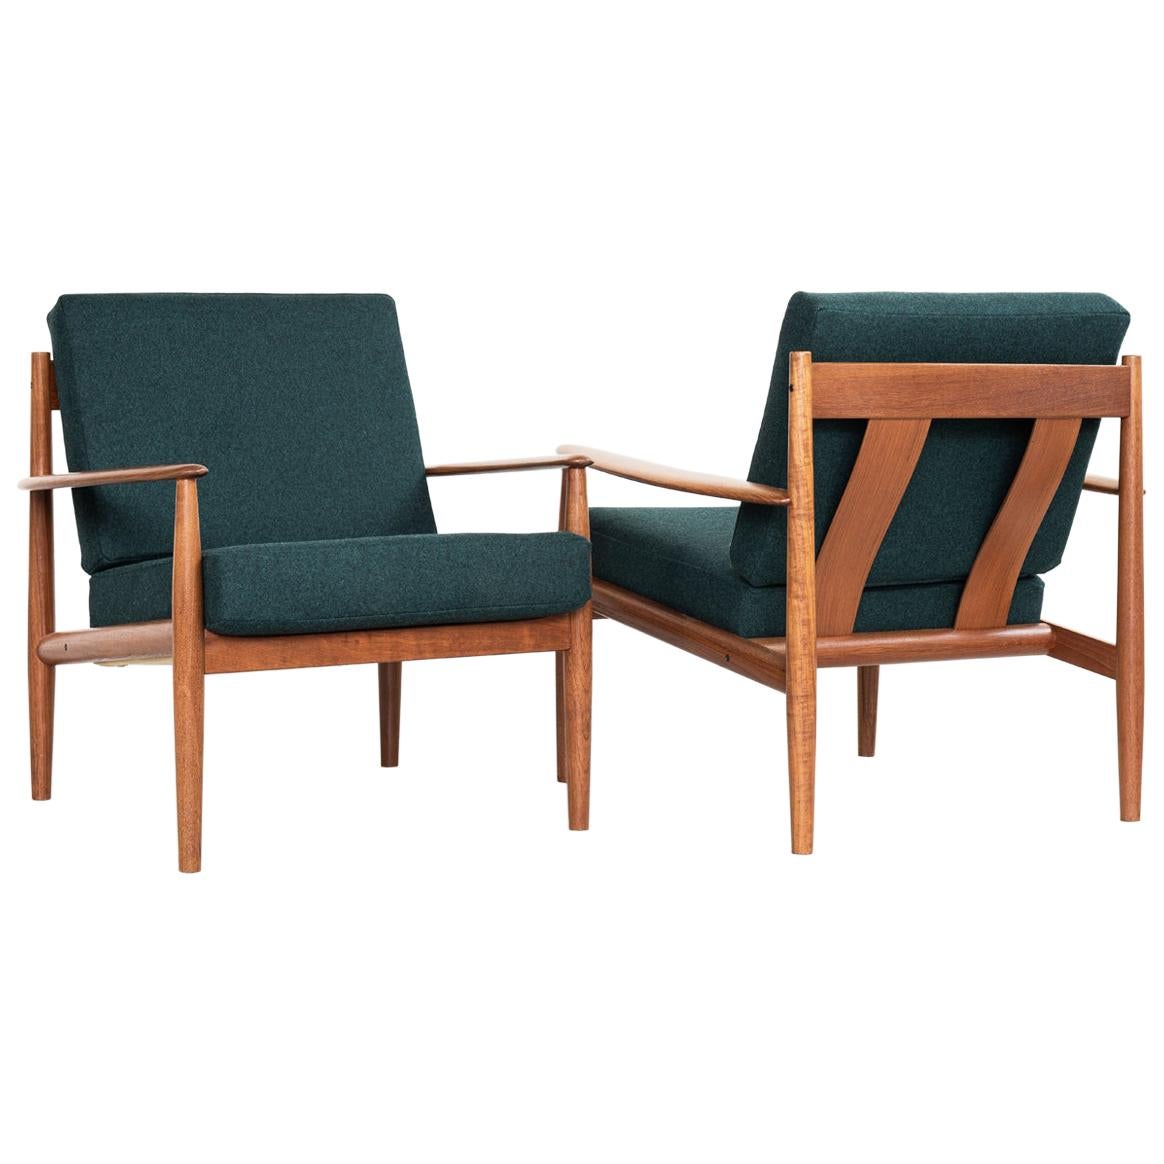 Midcentury Danish Pair of Easy Chairs in Teak by Grete Jalk for France & Søn For Sale